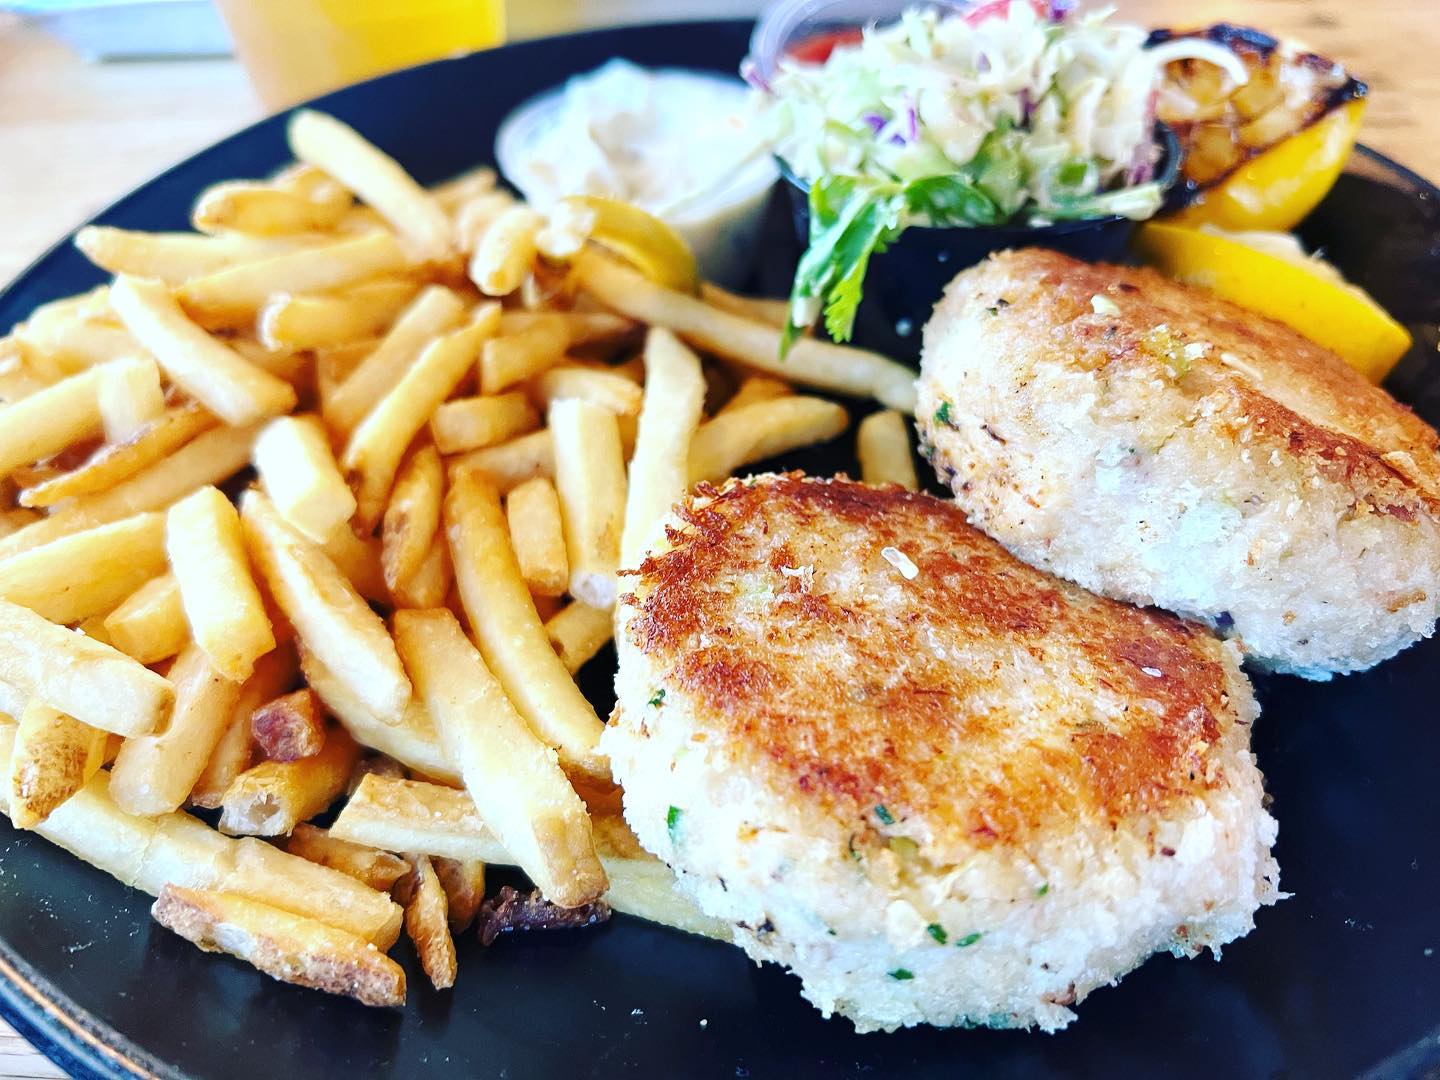 Crab Cakes from Mitch's Seafood